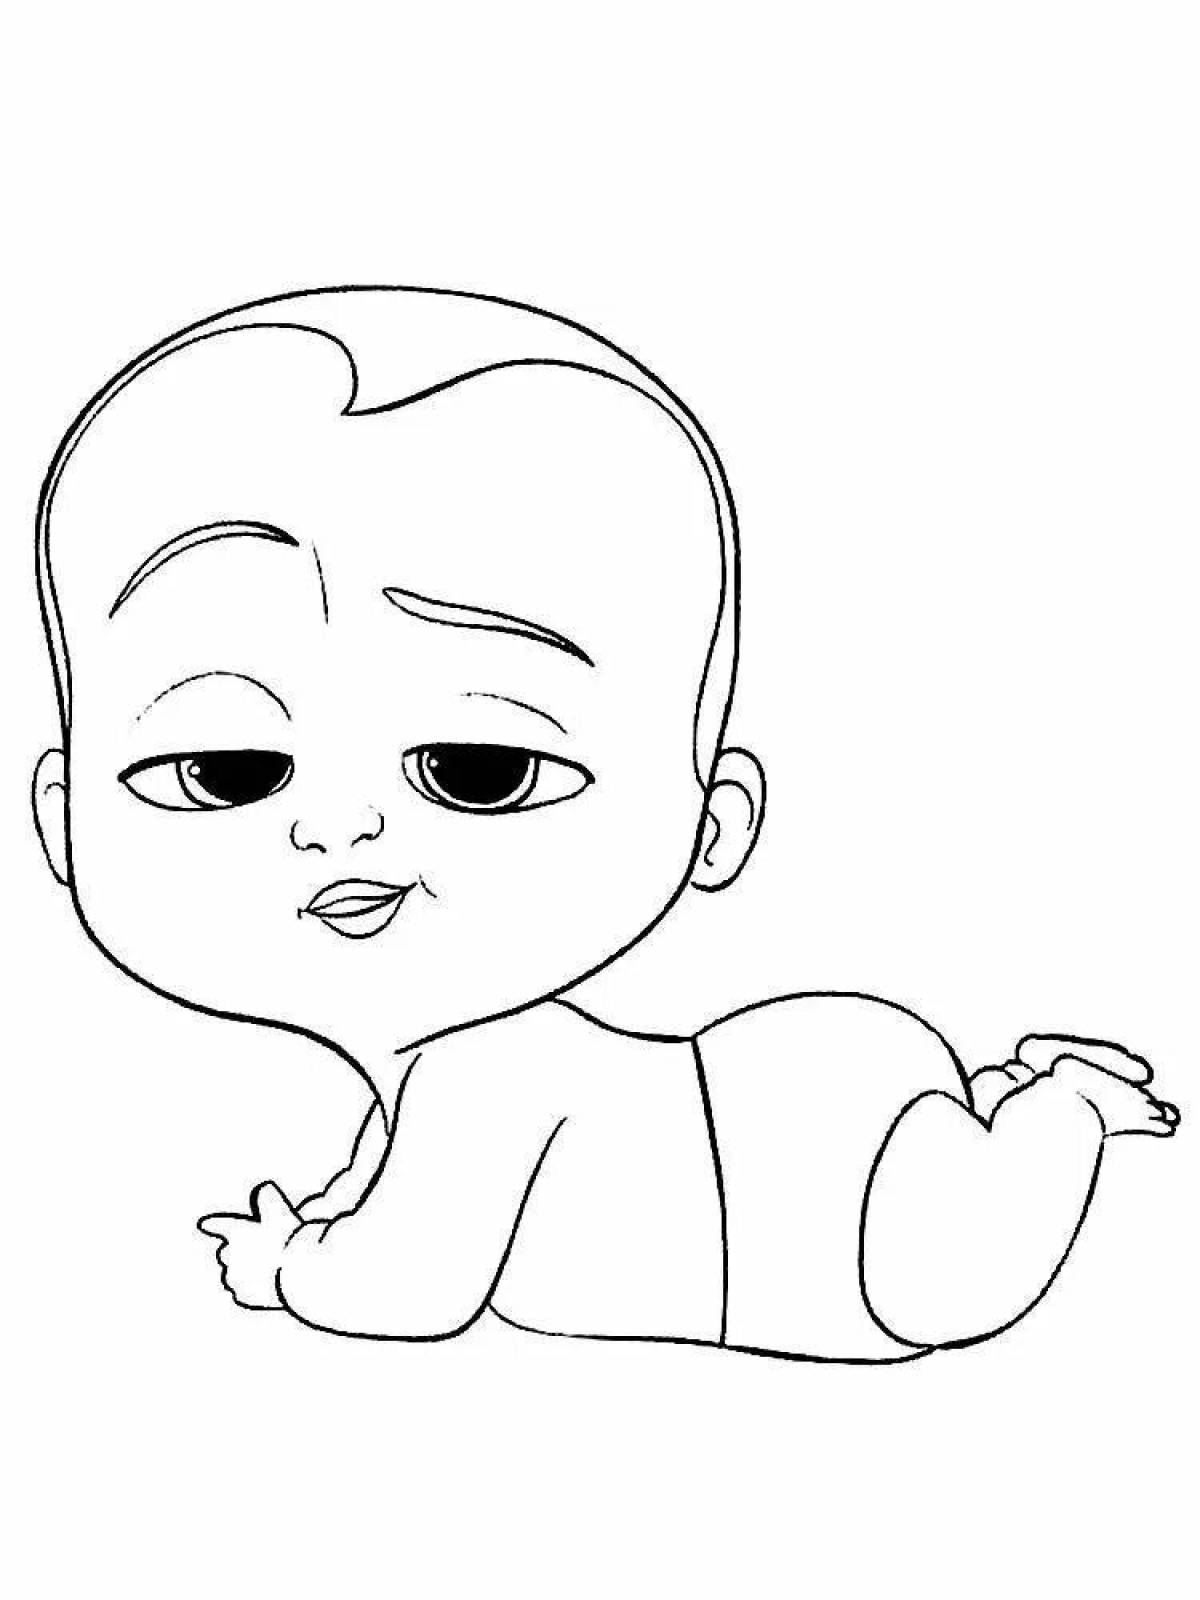 Blessed Charon baby coloring page